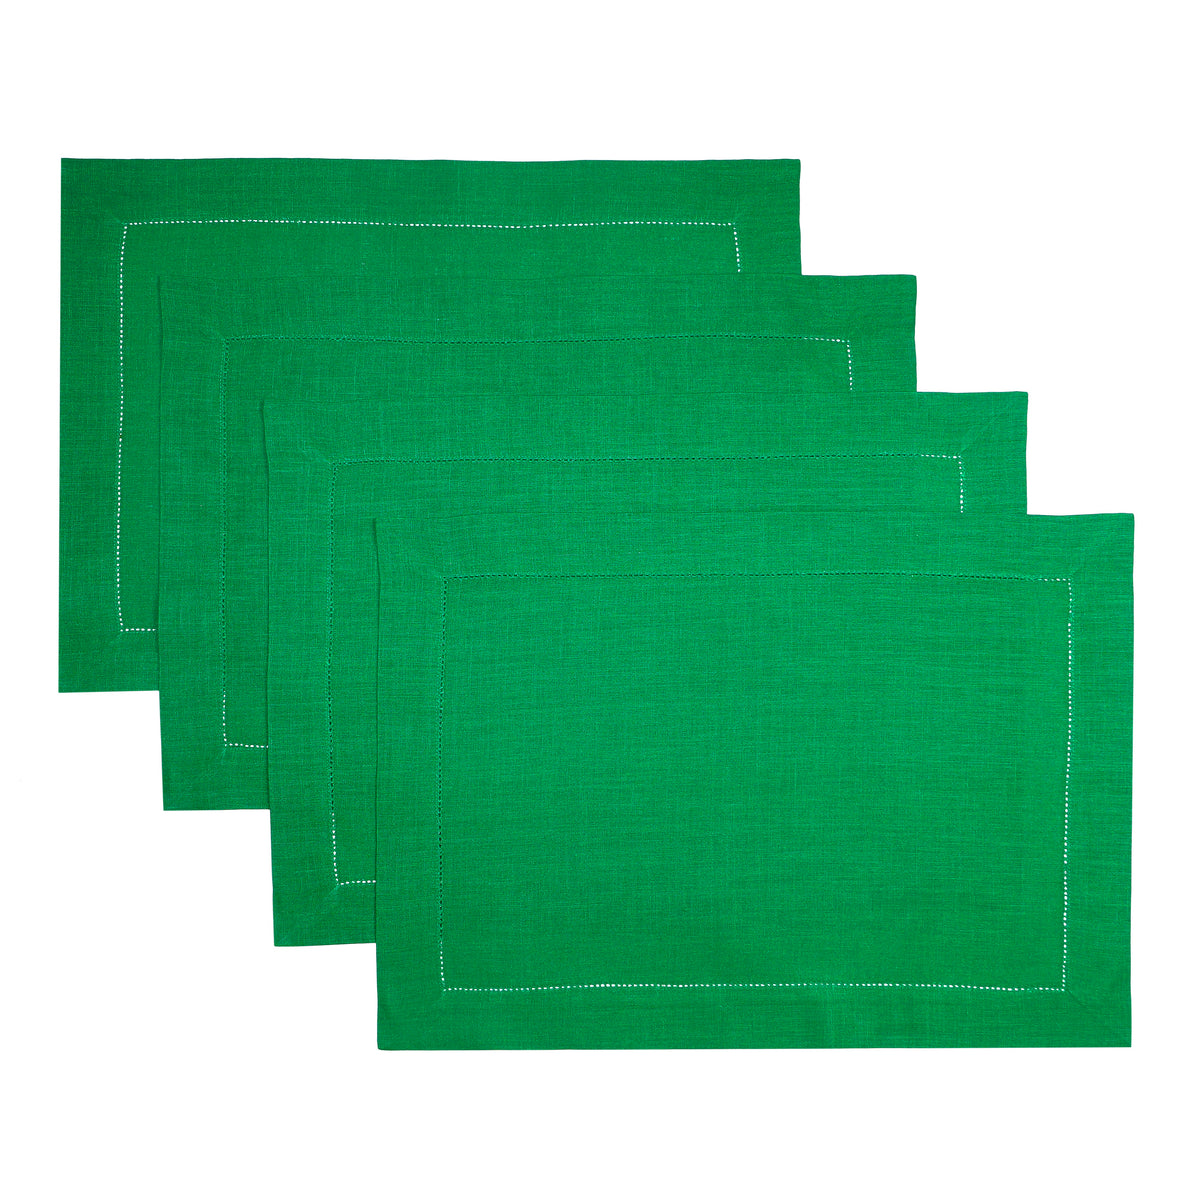 Kelly Green Linen Placemats 14 x 19 Inch Set of 4 - Hemstitch